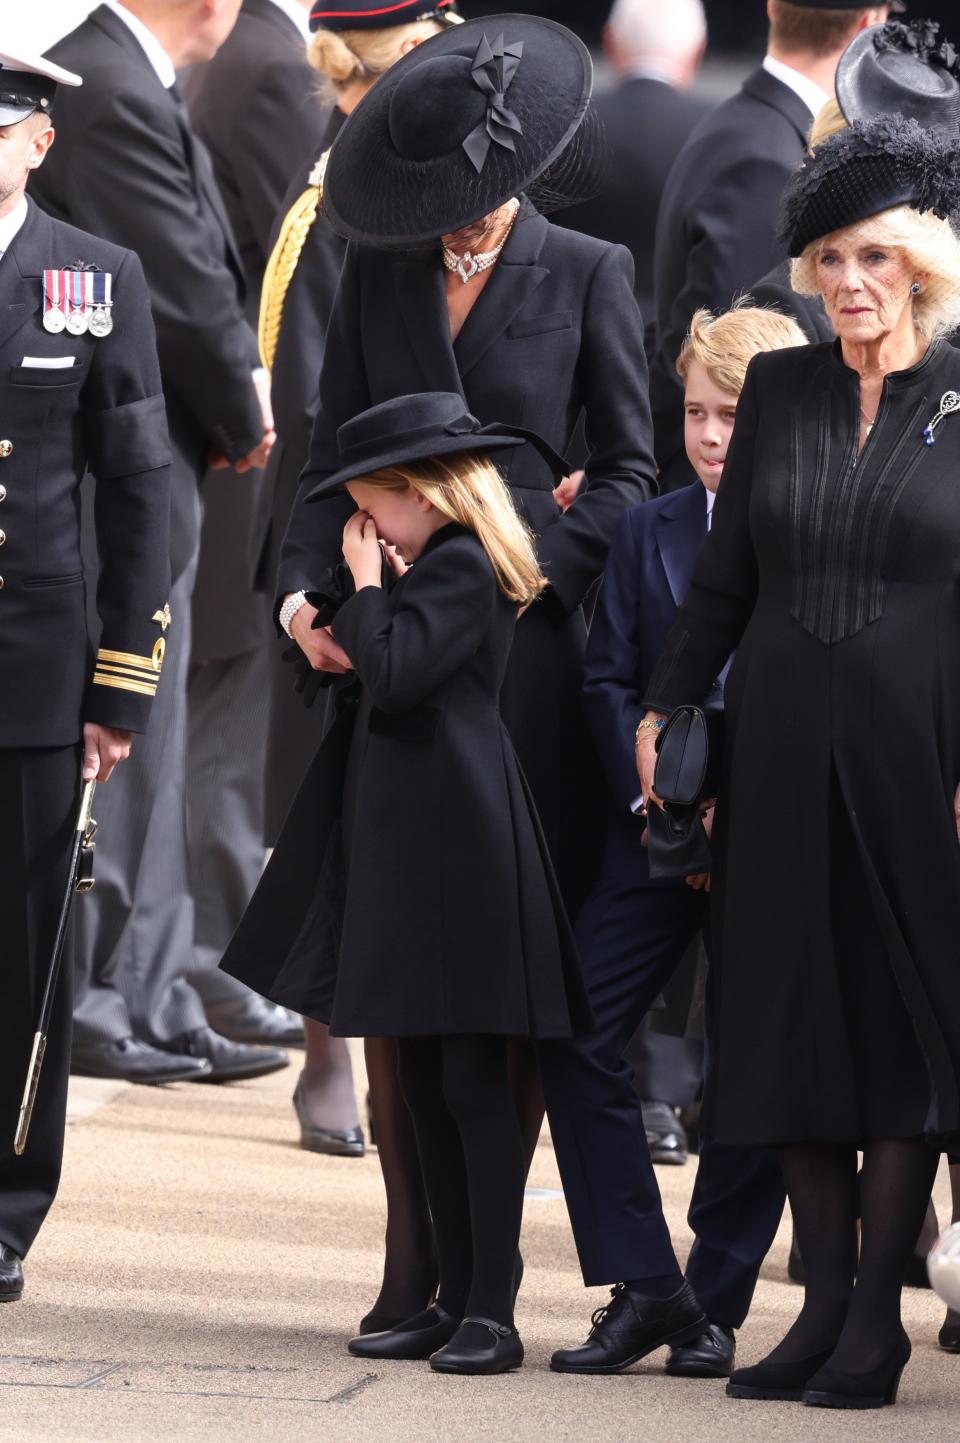 Princess Charlotte cries next to her mother, Princess Kate, after the funeral of her great-grandmother, Queen Elizabeth II.